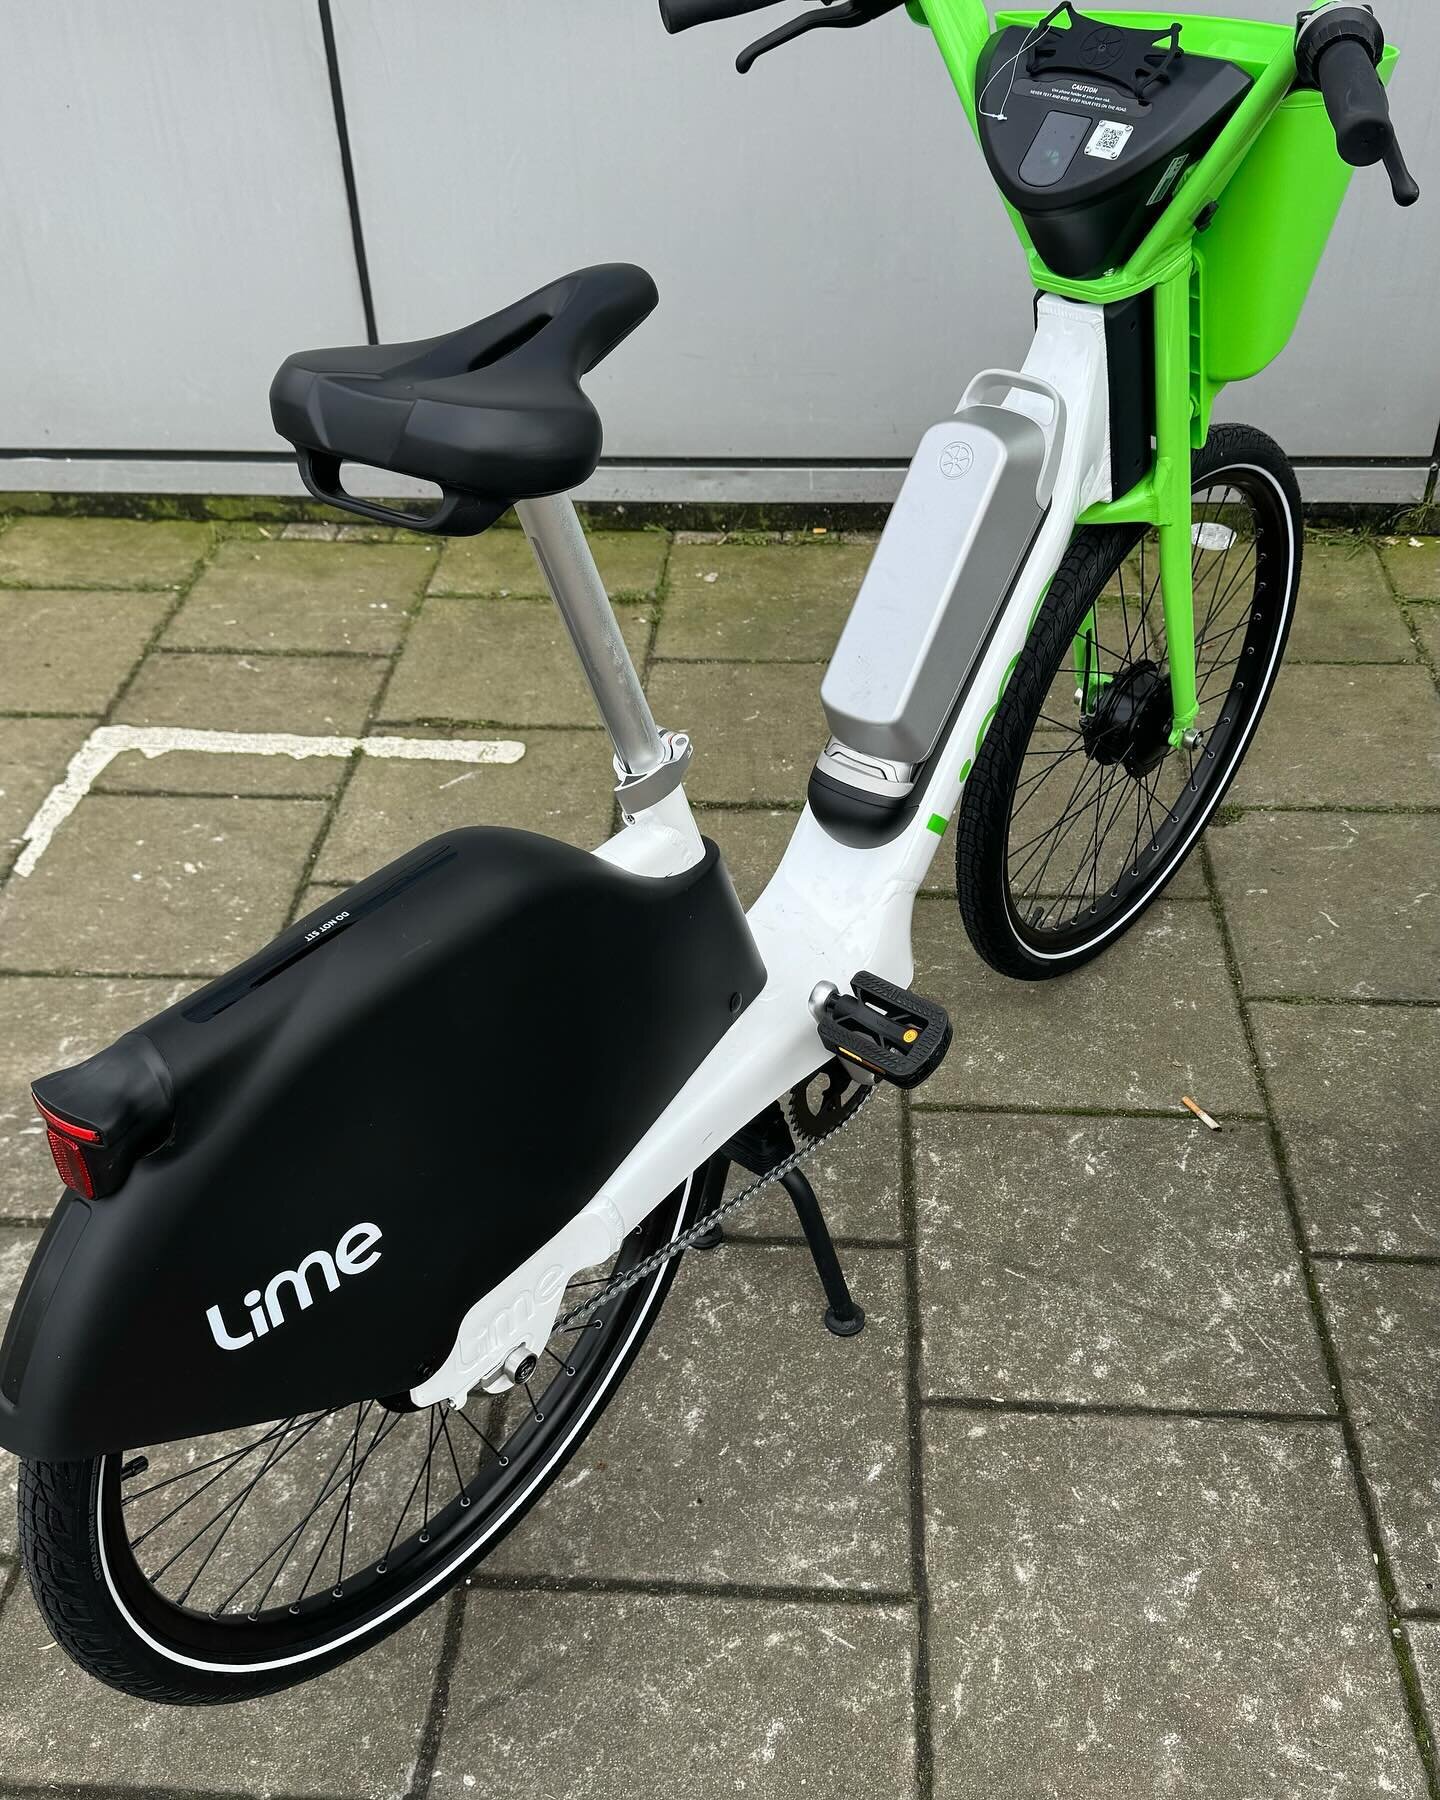 Just clocked in over 4,500km/2800 miles on my @lime bike since I kicked off this incredible journey a few years back to use them as my main transport in London! 🚴&zwj;♂️✨ [Swipe Left]

There&rsquo;s no better way to weave through London&rsquo;s bust